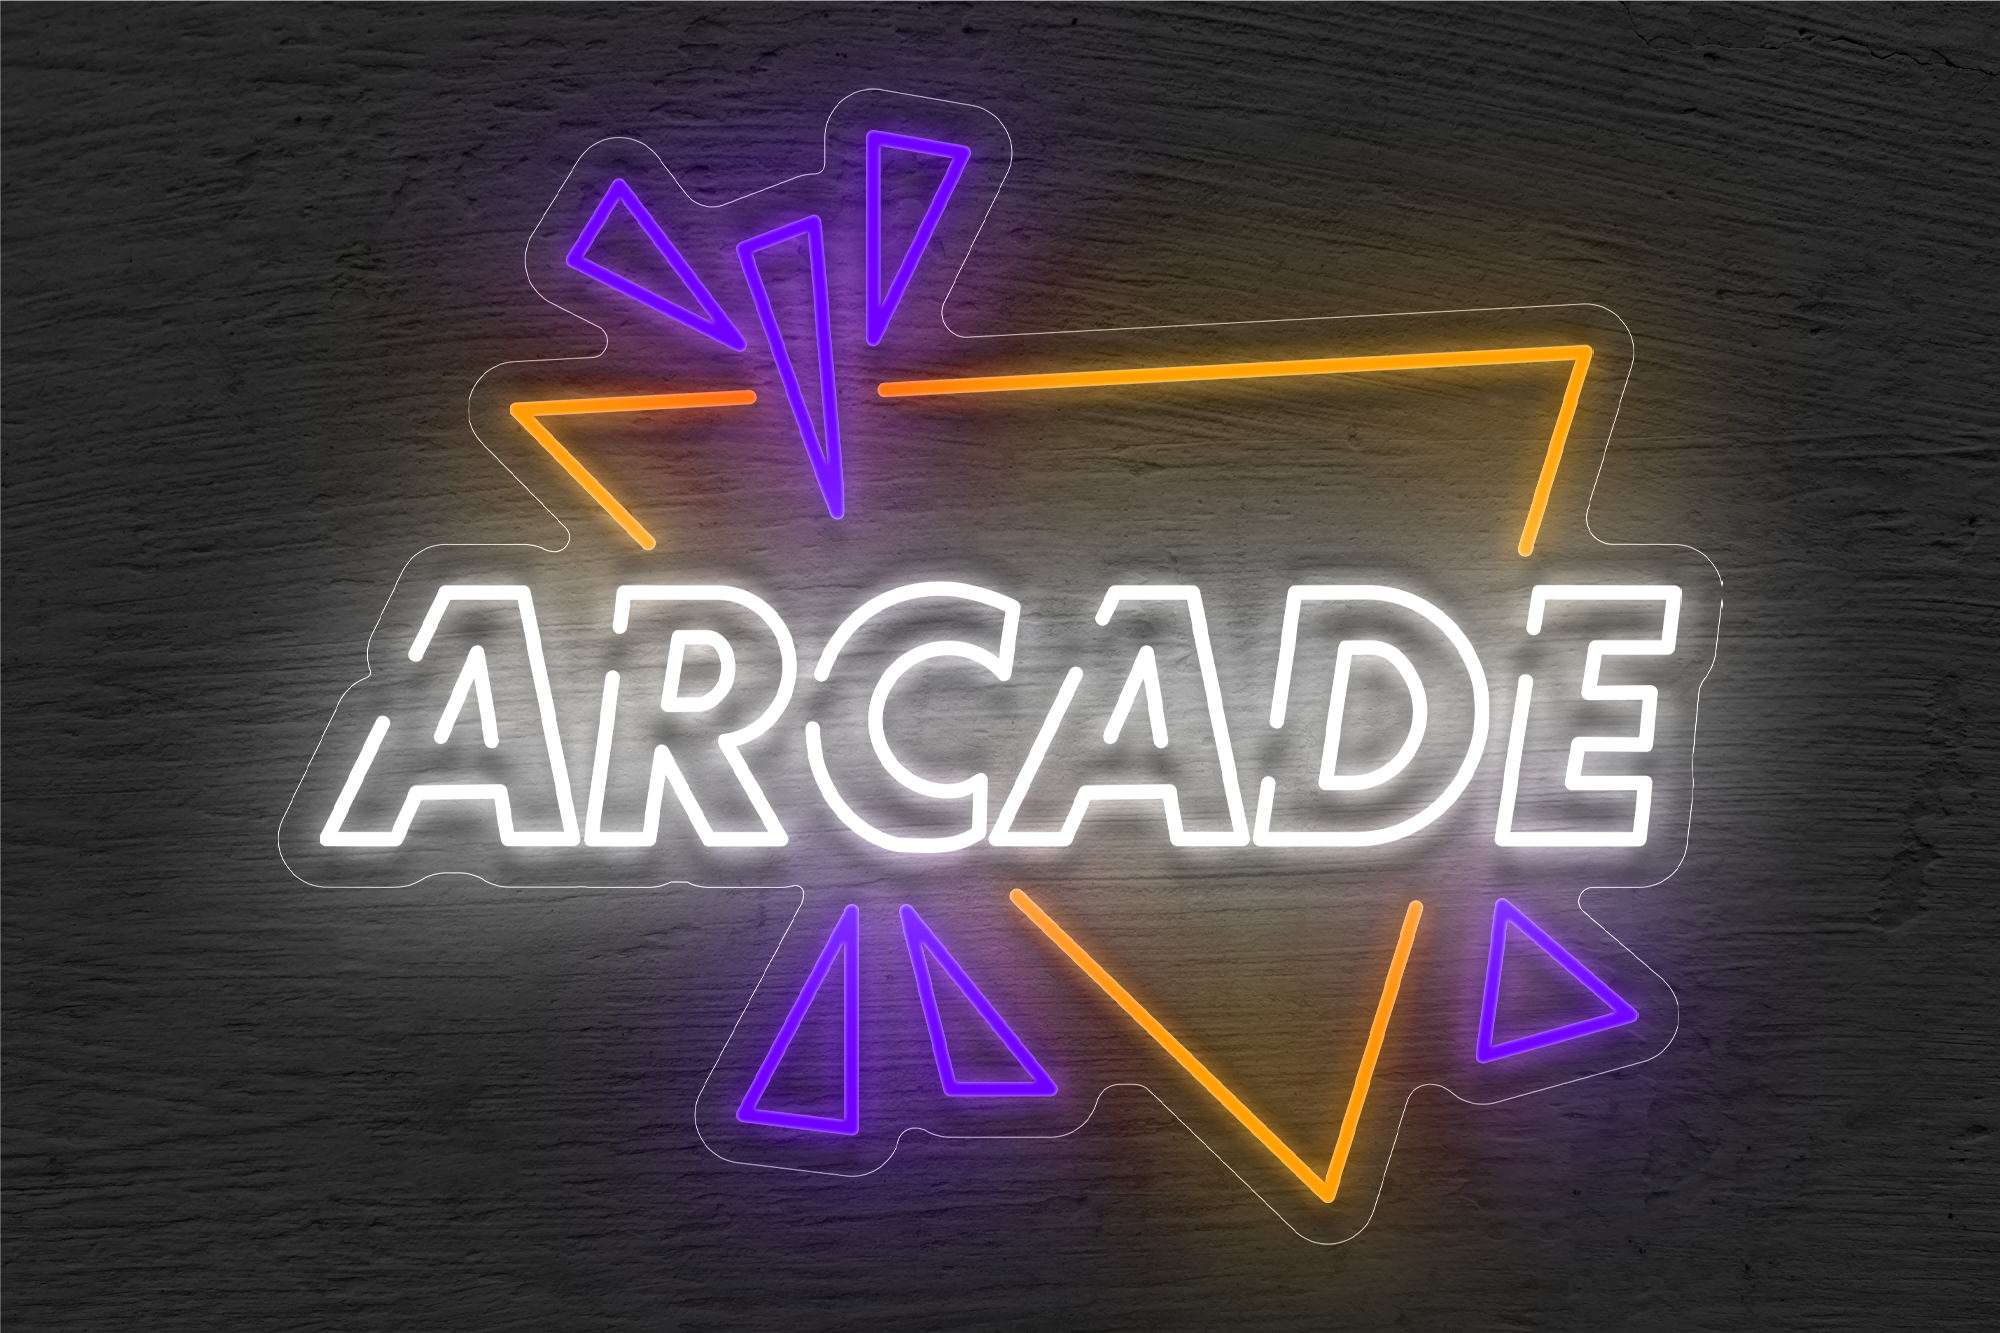 "Arcade" with Triangle Border LED Neon Sign